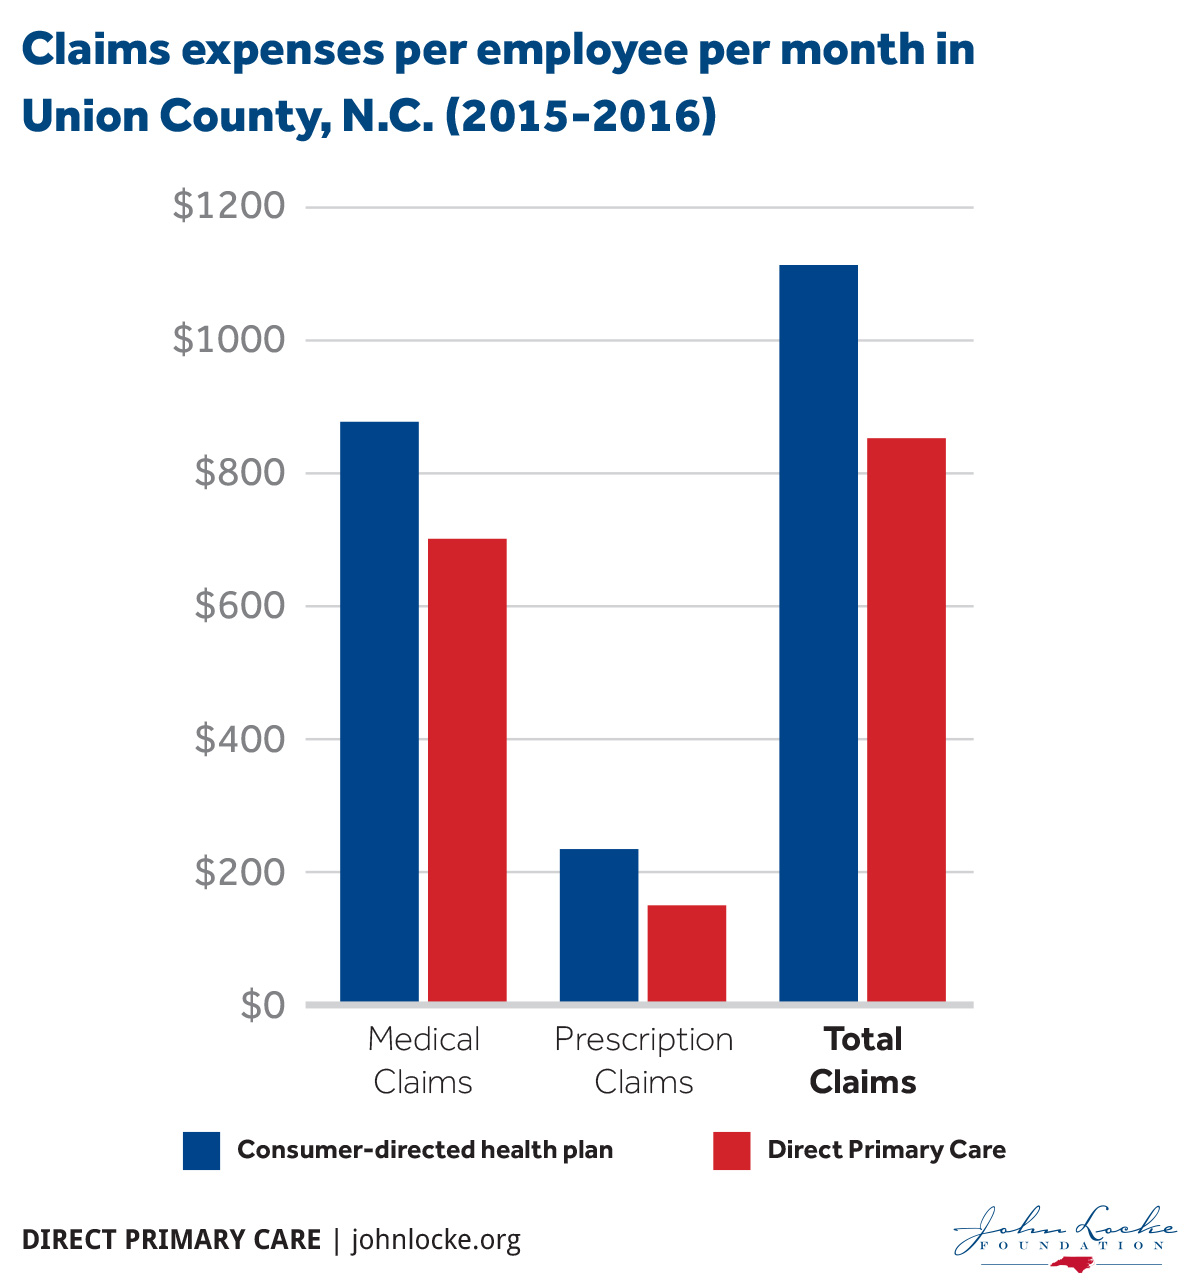 Claims expenses per employee per month in Union County, N.C. (2015-2016)